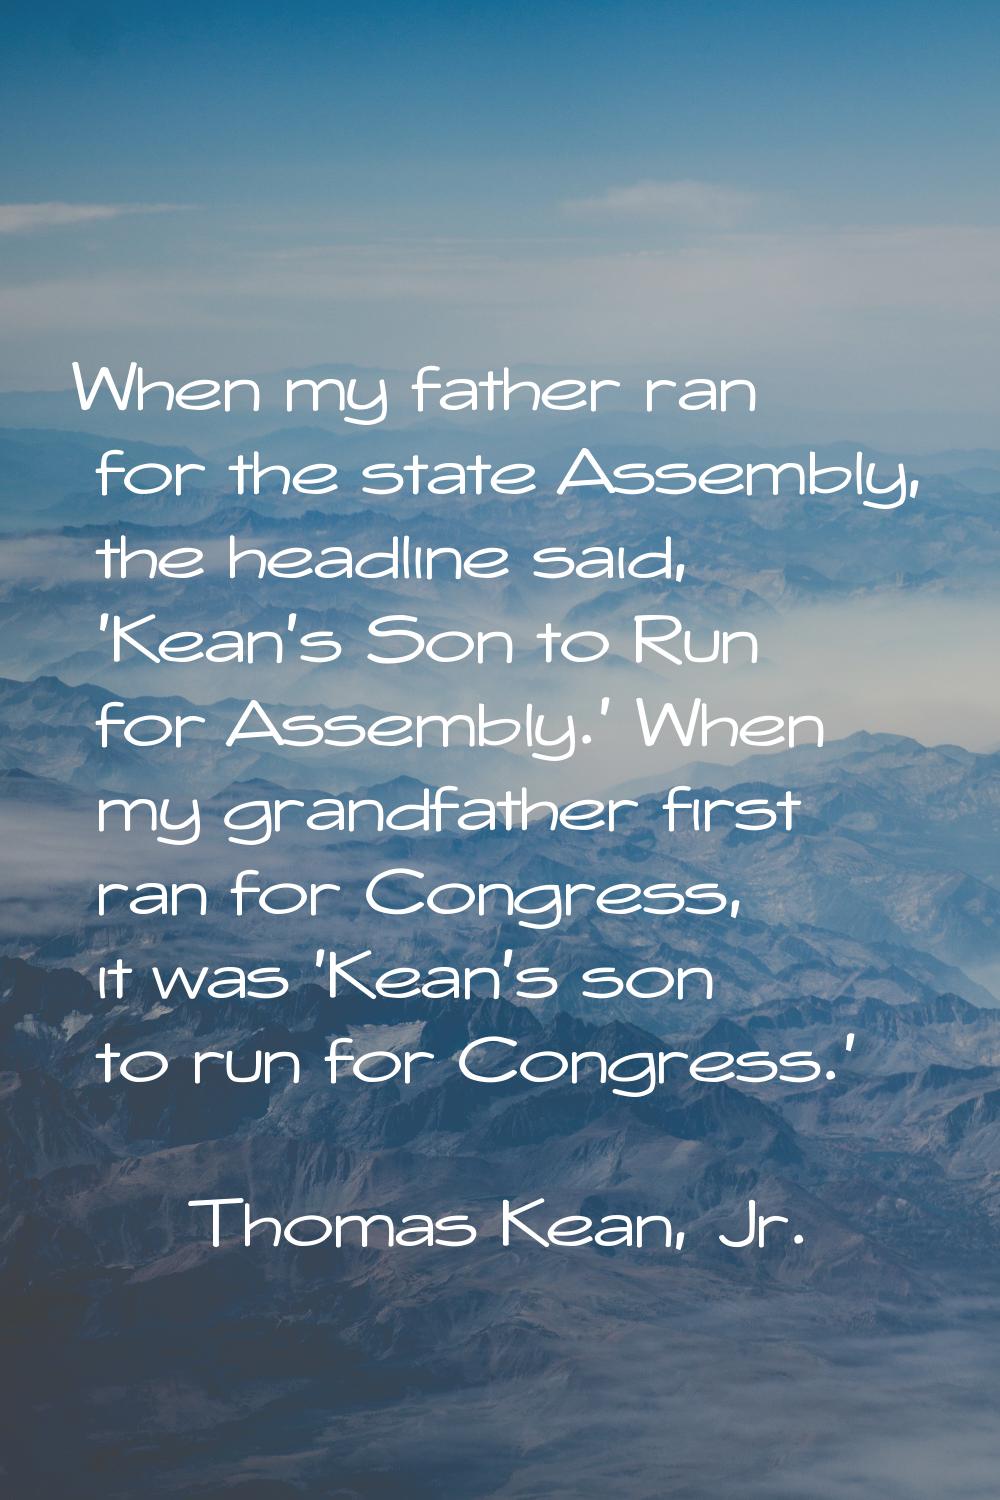 When my father ran for the state Assembly, the headline said, 'Kean's Son to Run for Assembly.' Whe